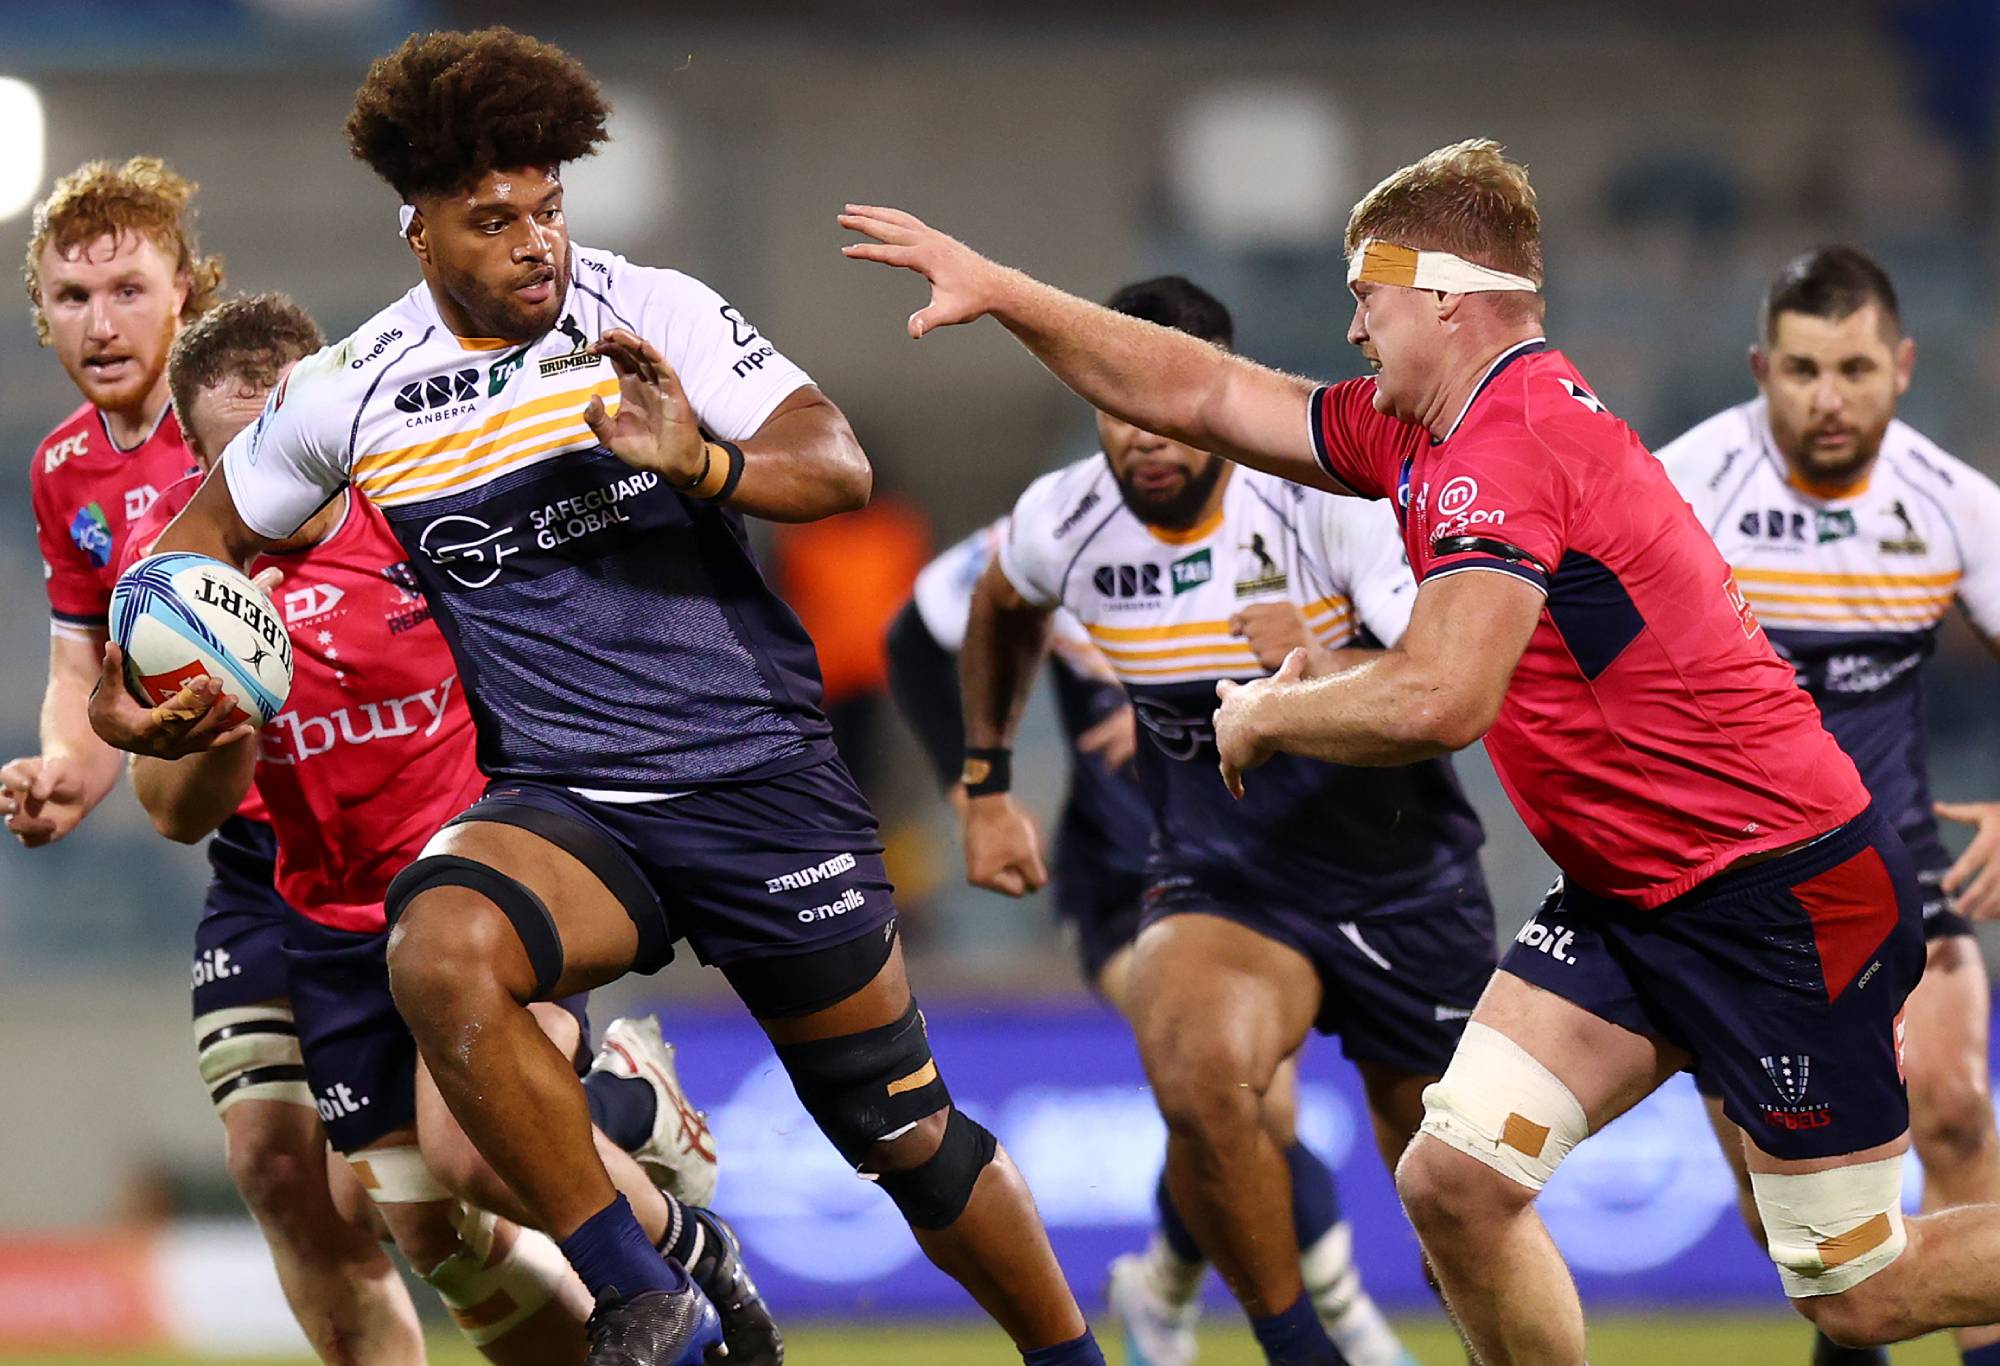 Robbie Valenti of the Brumbies makes a line break during the round 15 Super Rugby Pacific match between the ACT Brumbies and Melbourne Rebels at GIO Stadium, on June 02, 2023, in Canberra, Australia. (Photo by Mark Nolan/Getty Images)